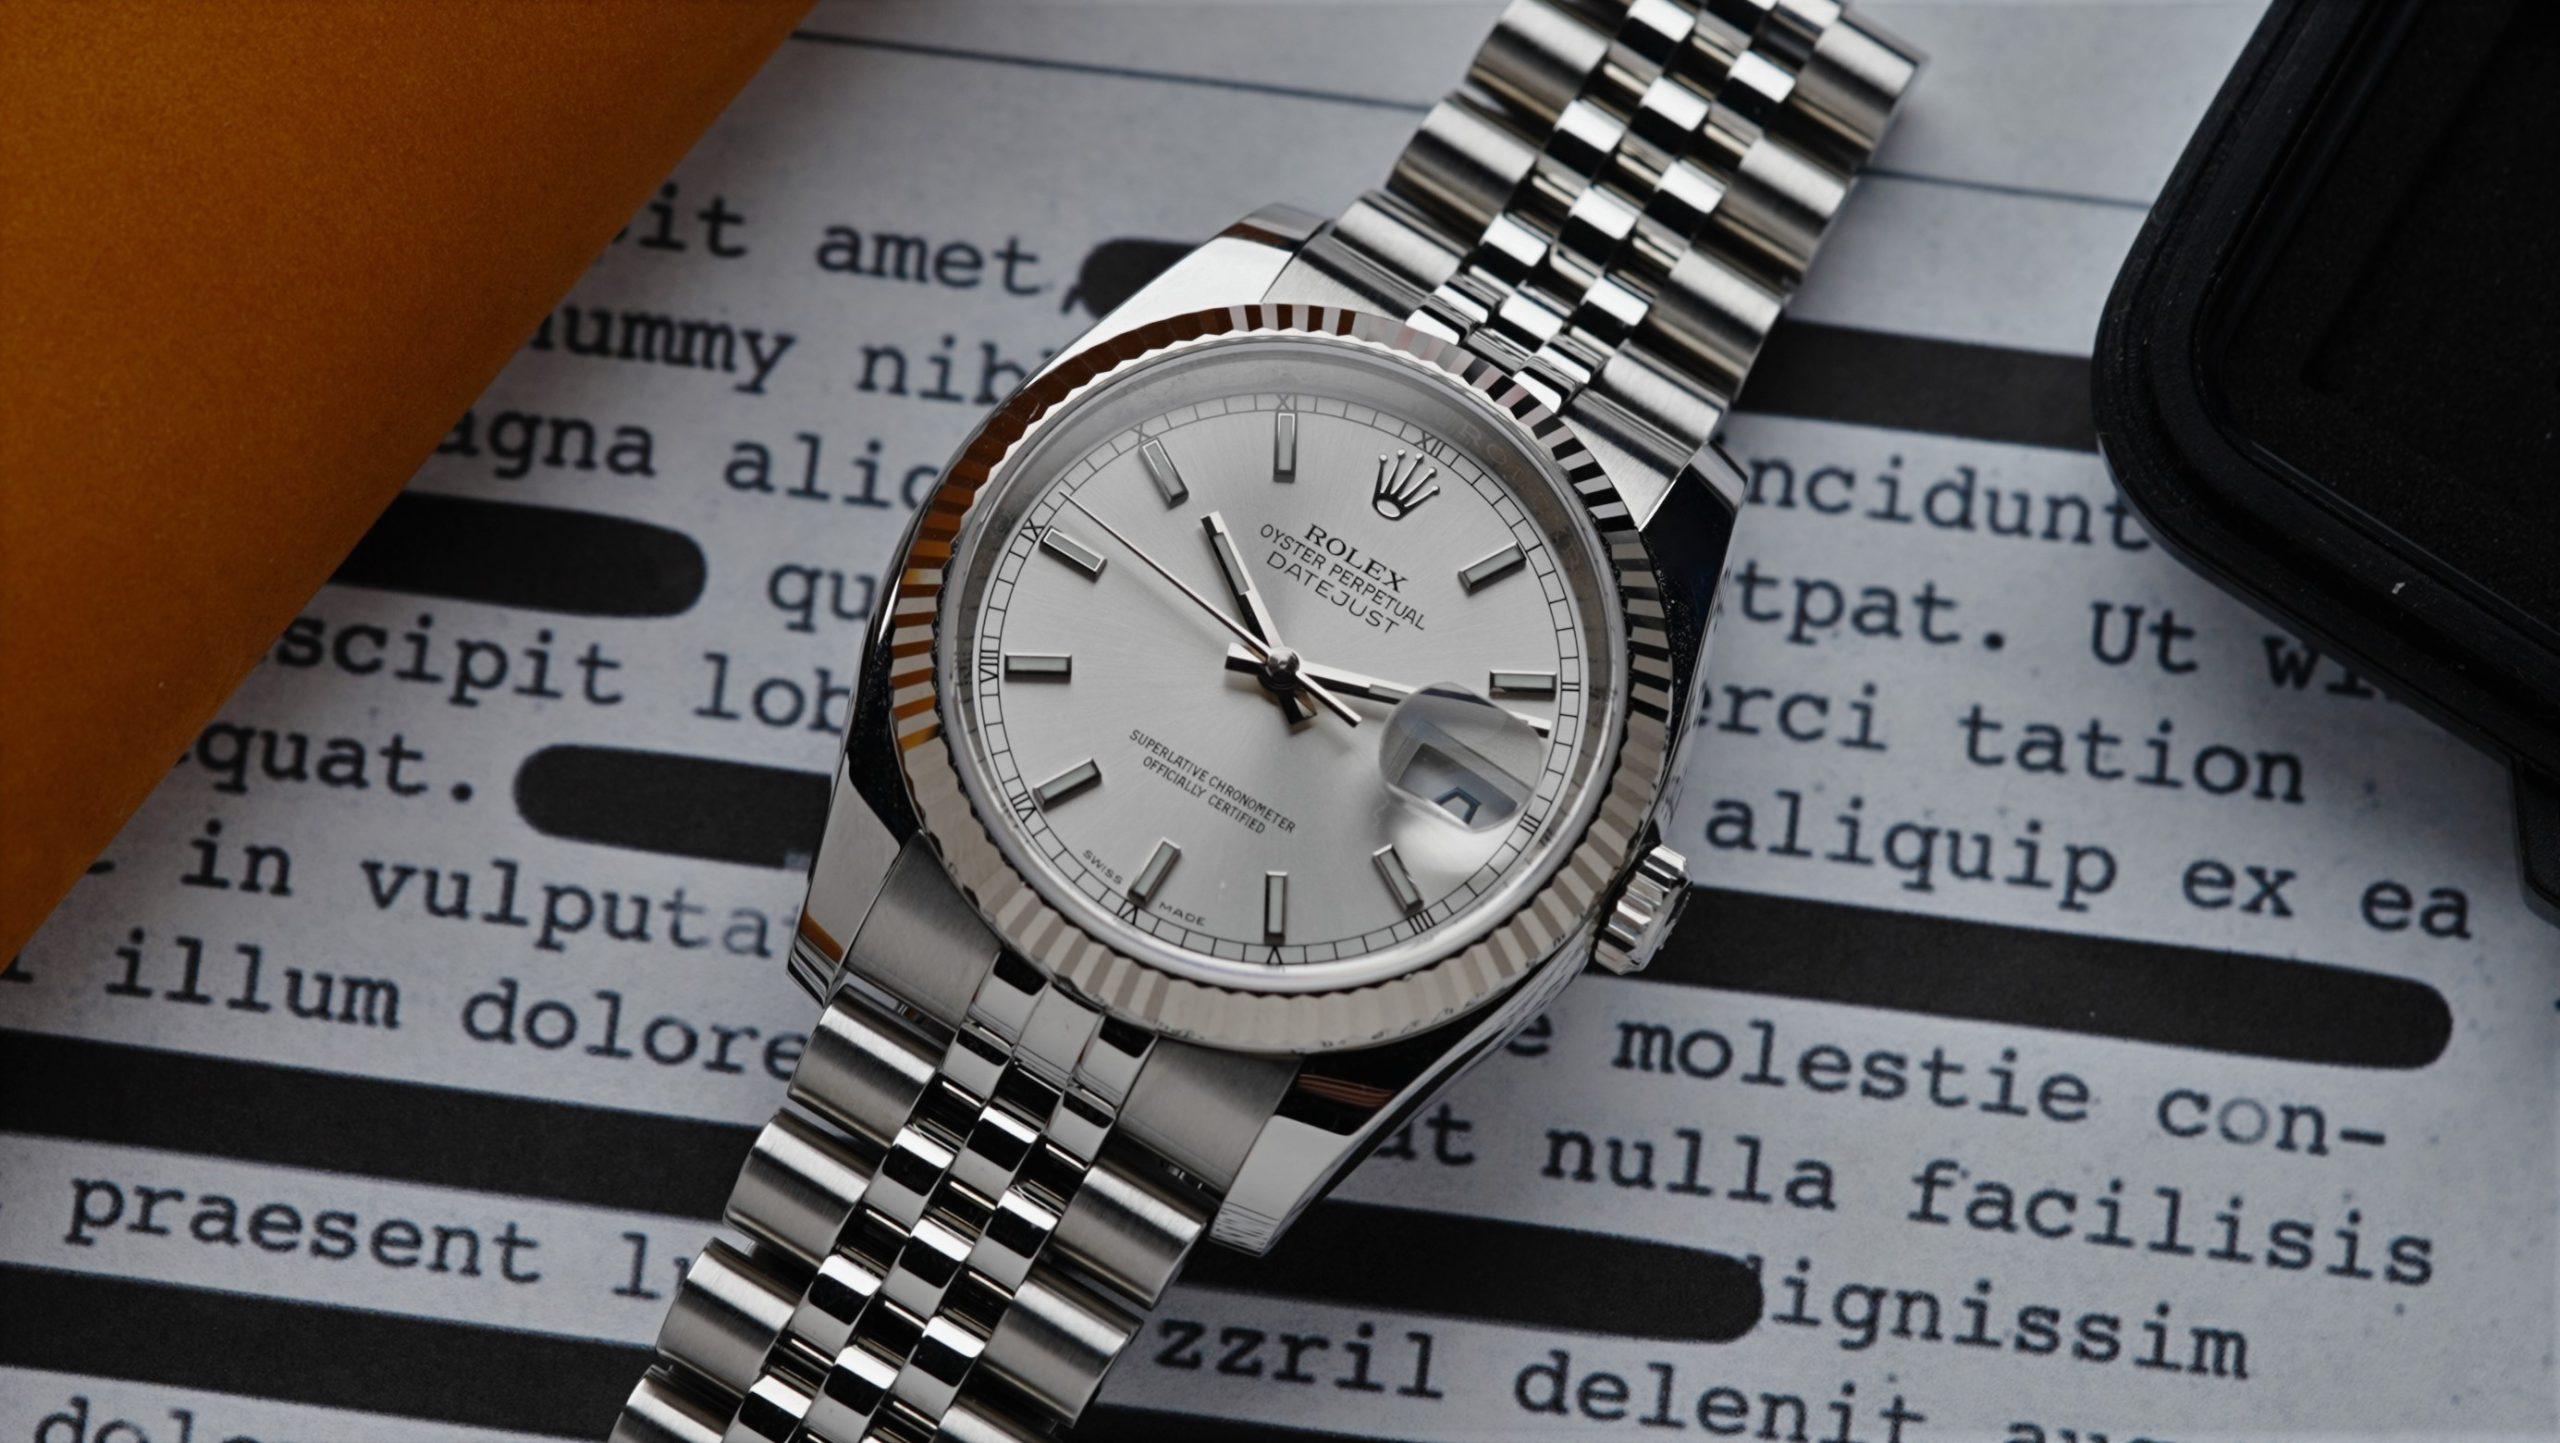 Rolex Datejust 36 Silver Dial watch with document in background.